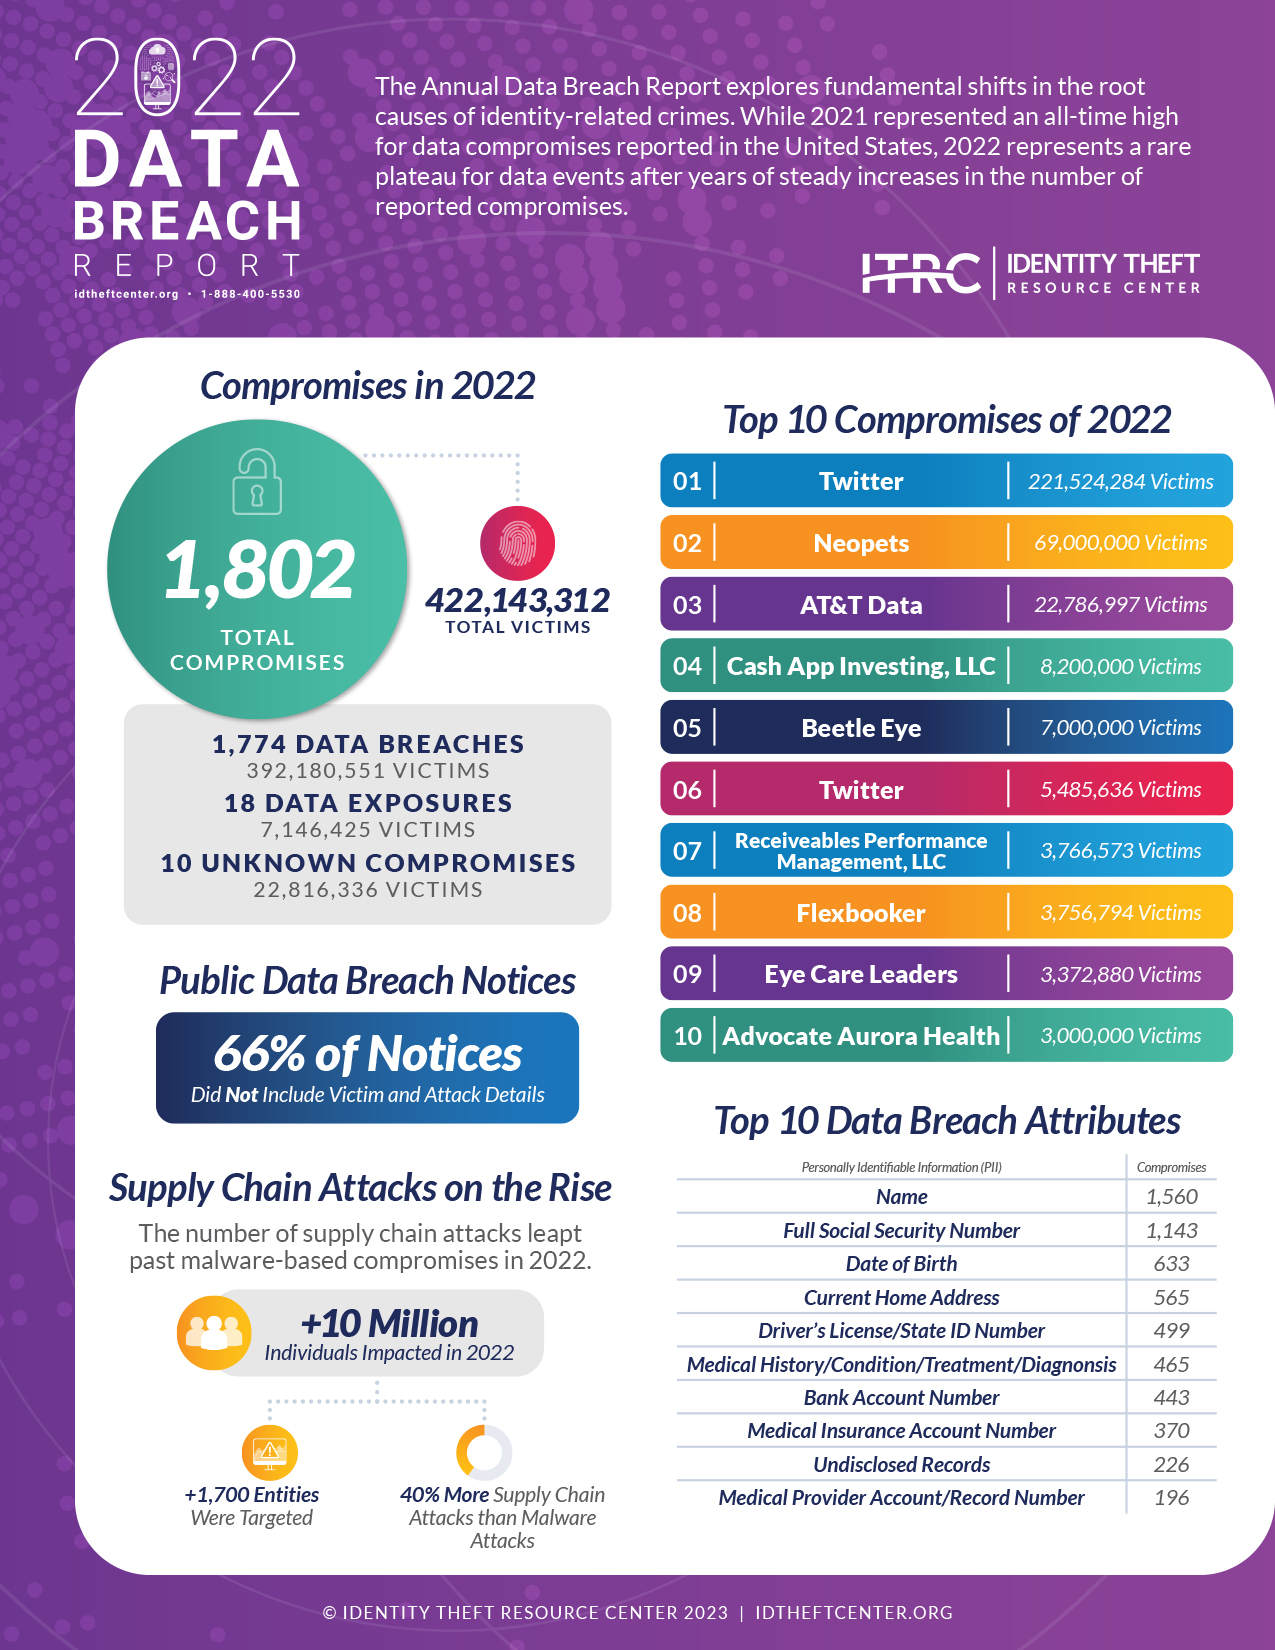 According to the 2022 Annual Data Breach Report, the number of data compromises in 2022 (1,802) was only 60 events short of the previous all-time high set in 2021 (1,862 compromises).